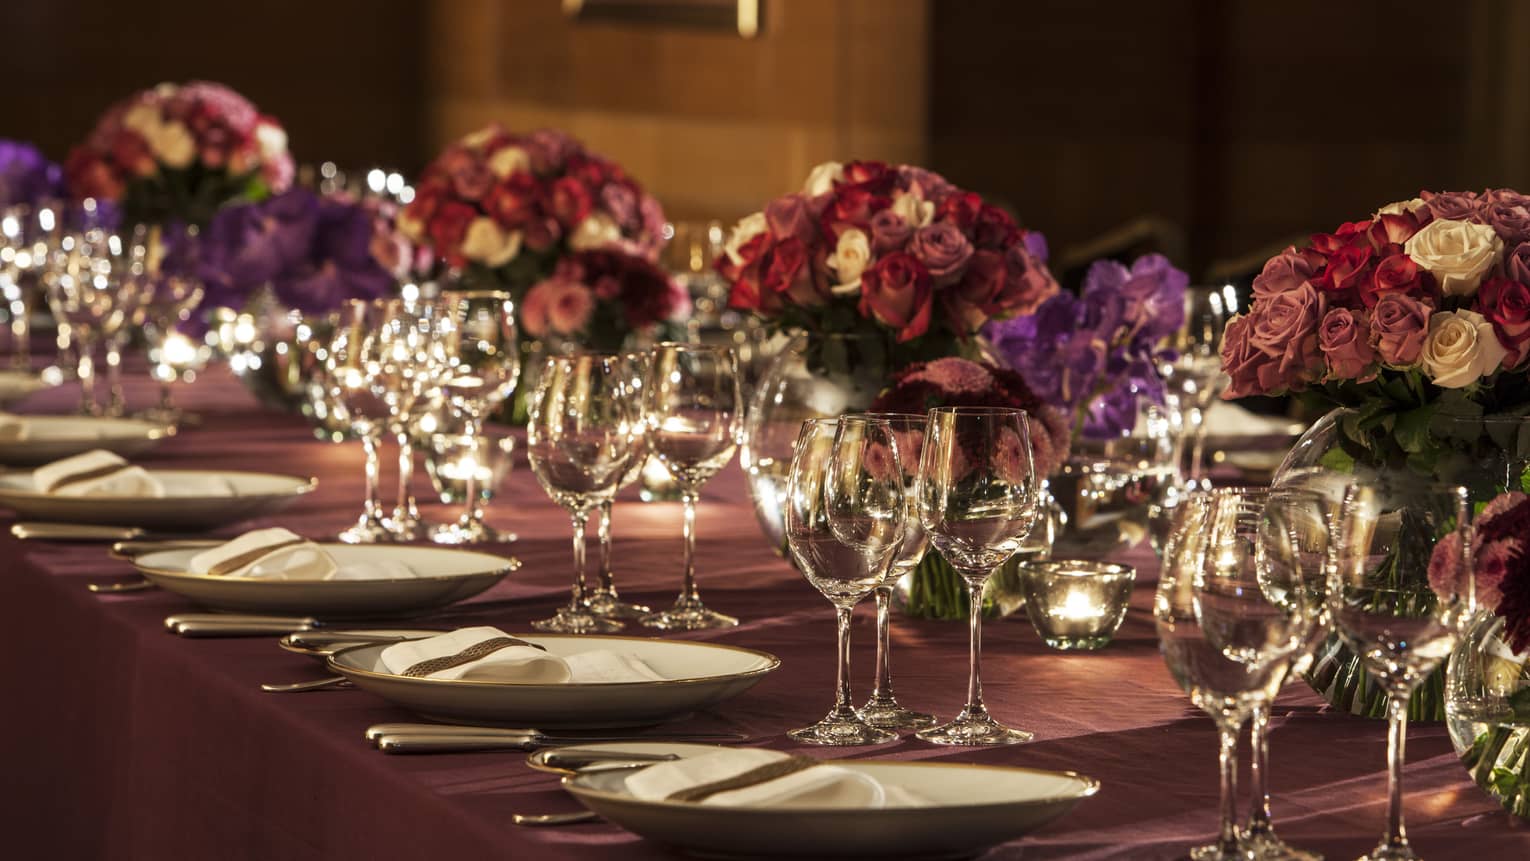 Deep pink and purple roses, wine glasses on elegant, candle-lit banquet table